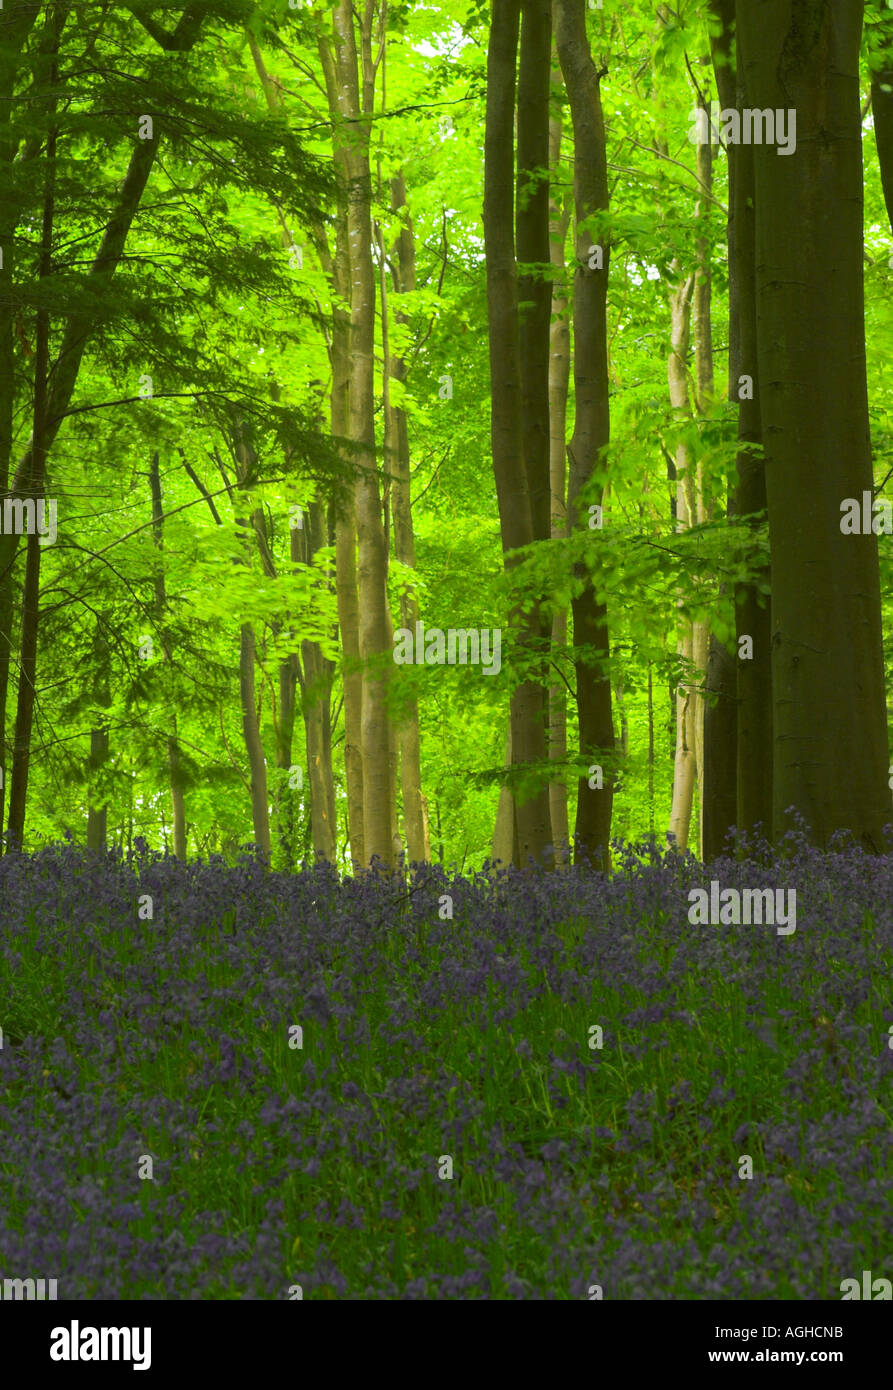 woodland carpeted with bluebells / wildflowers with upright trees and fresh cool green leaves and foliage Stock Photo